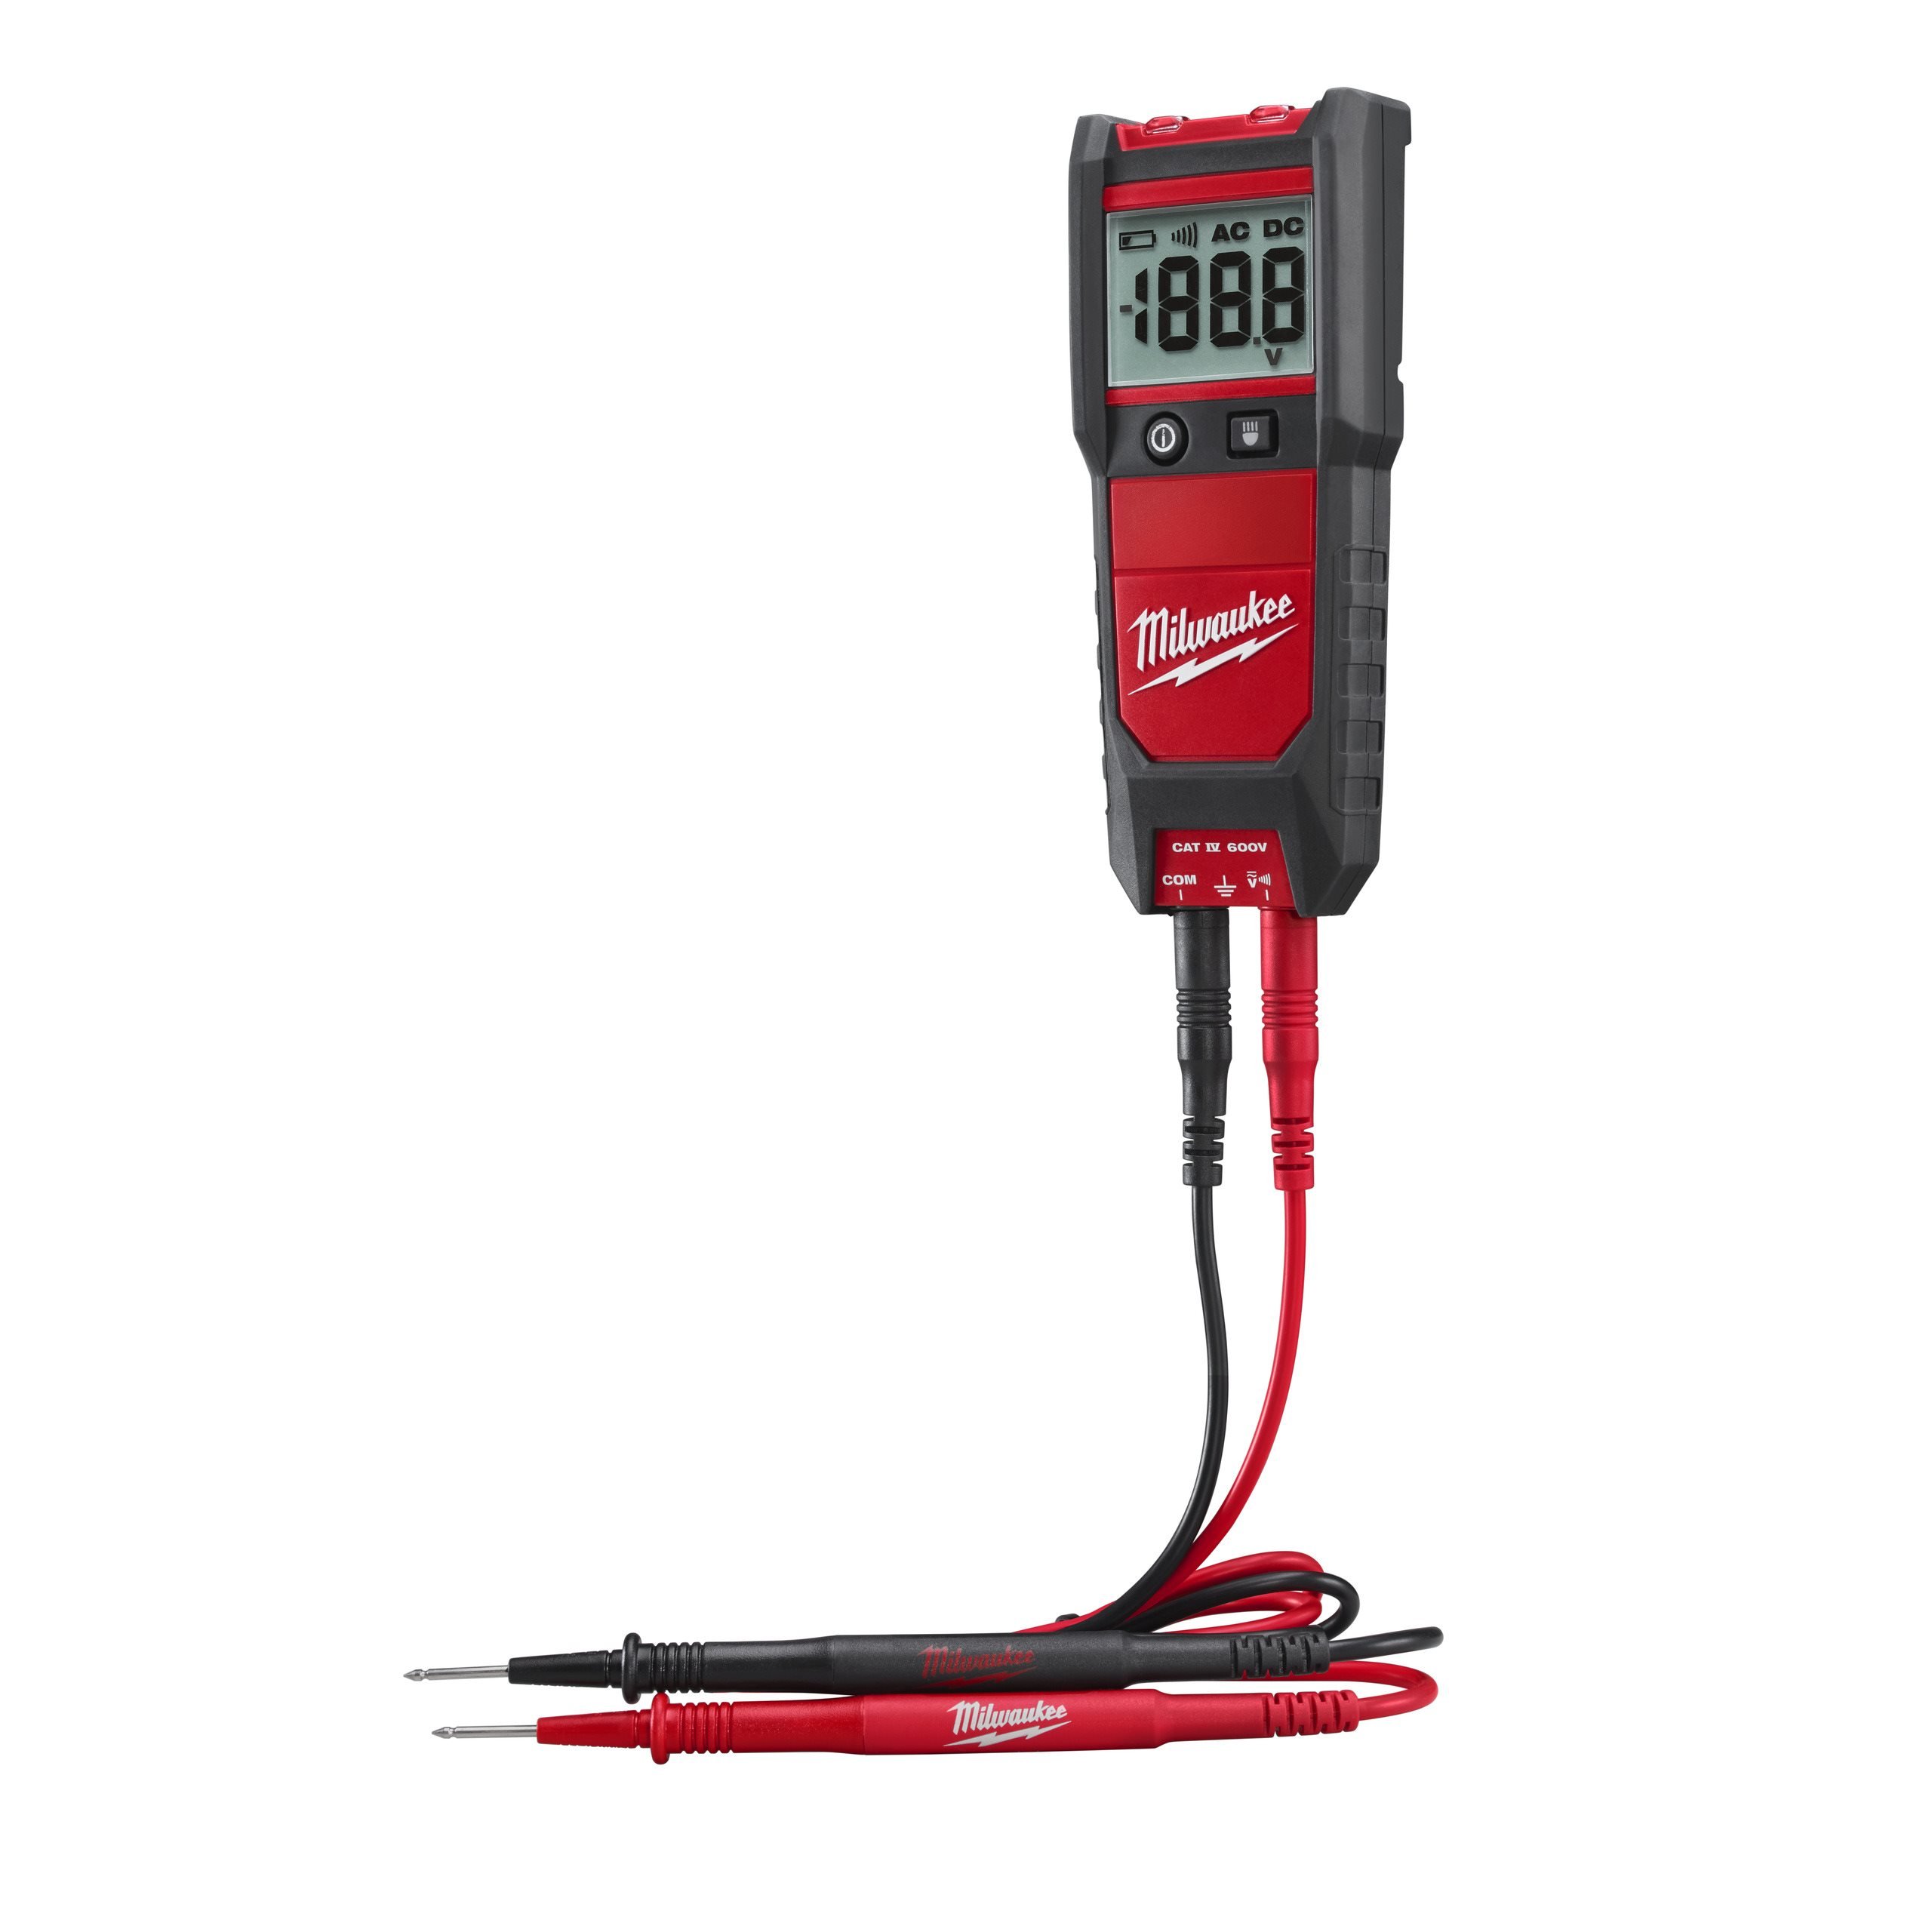 Cordless Continuity Tester | Cordless Voltage Tester | Milwaukee